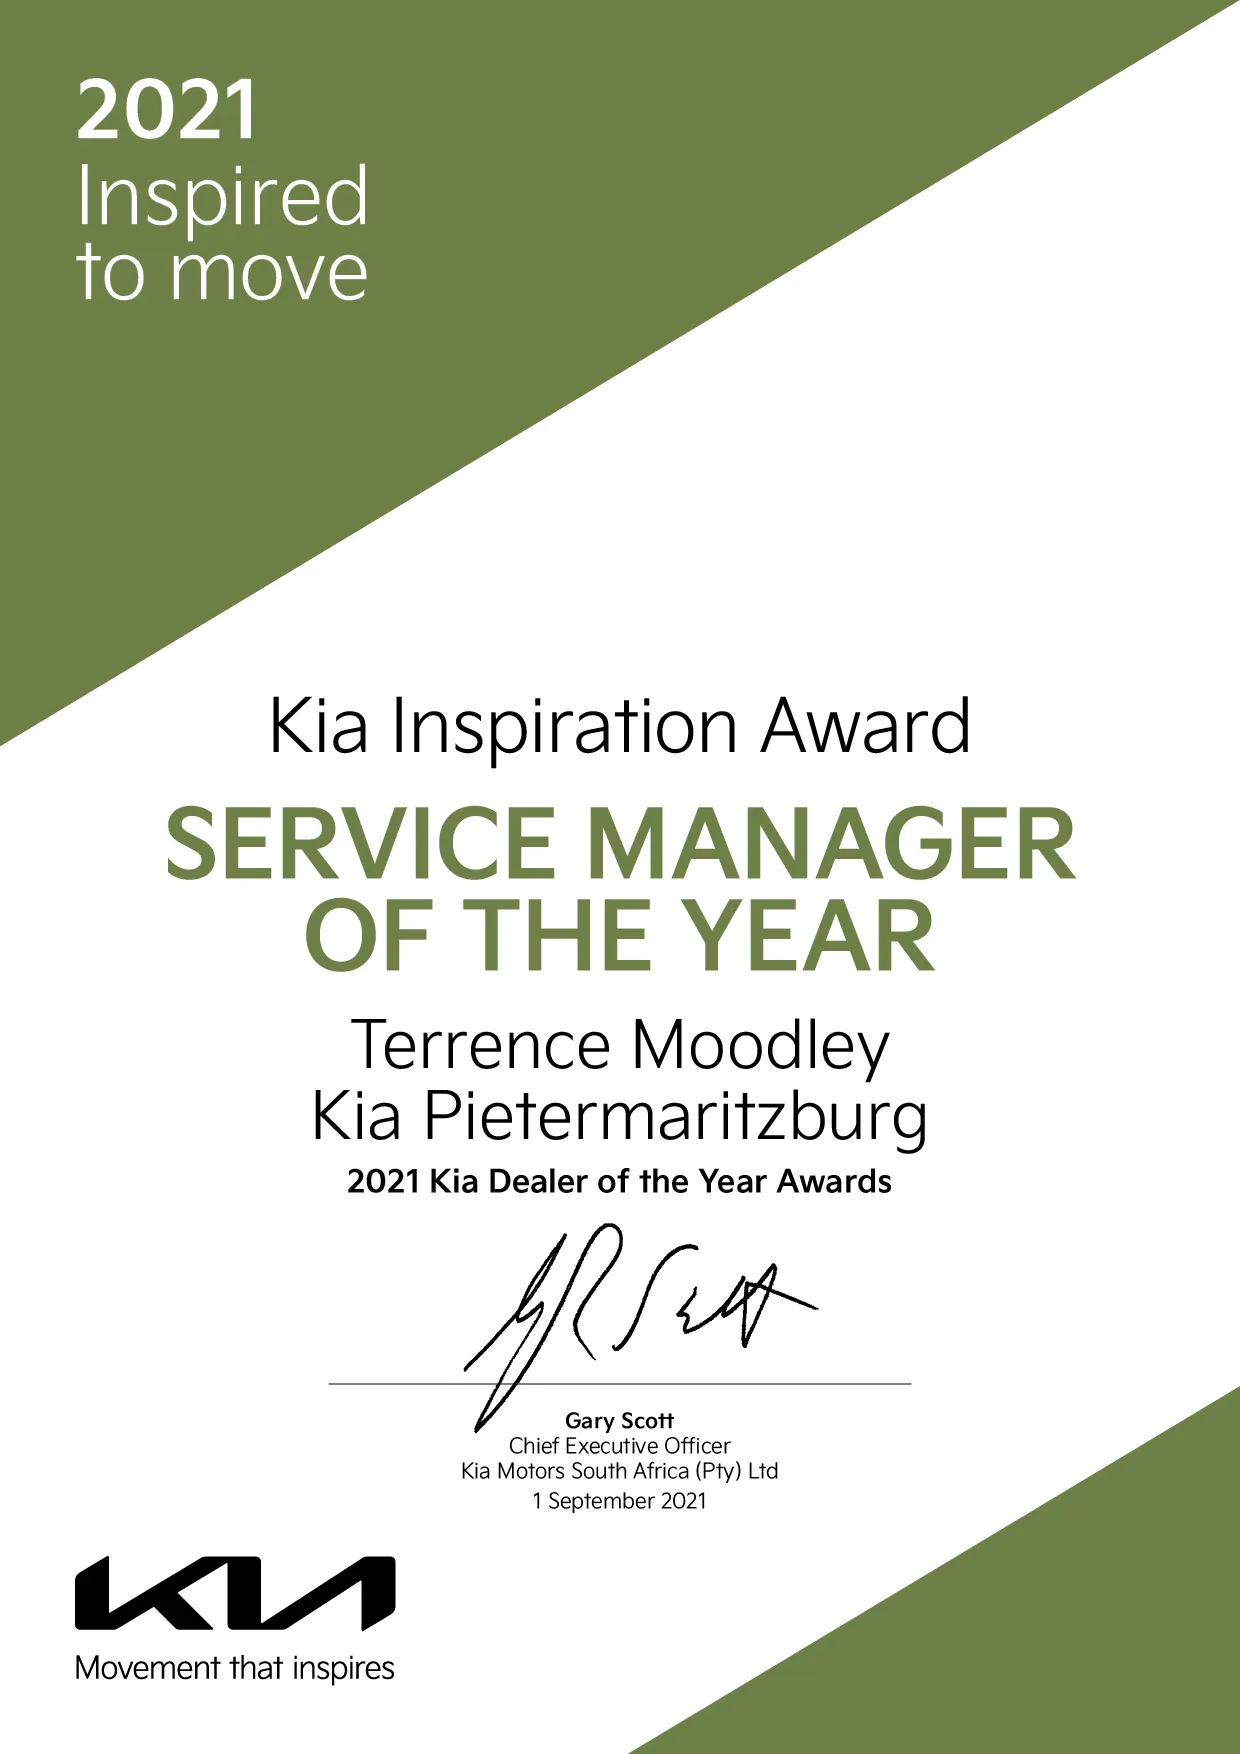 Service Manager Of The Year Certificate KIA PMB